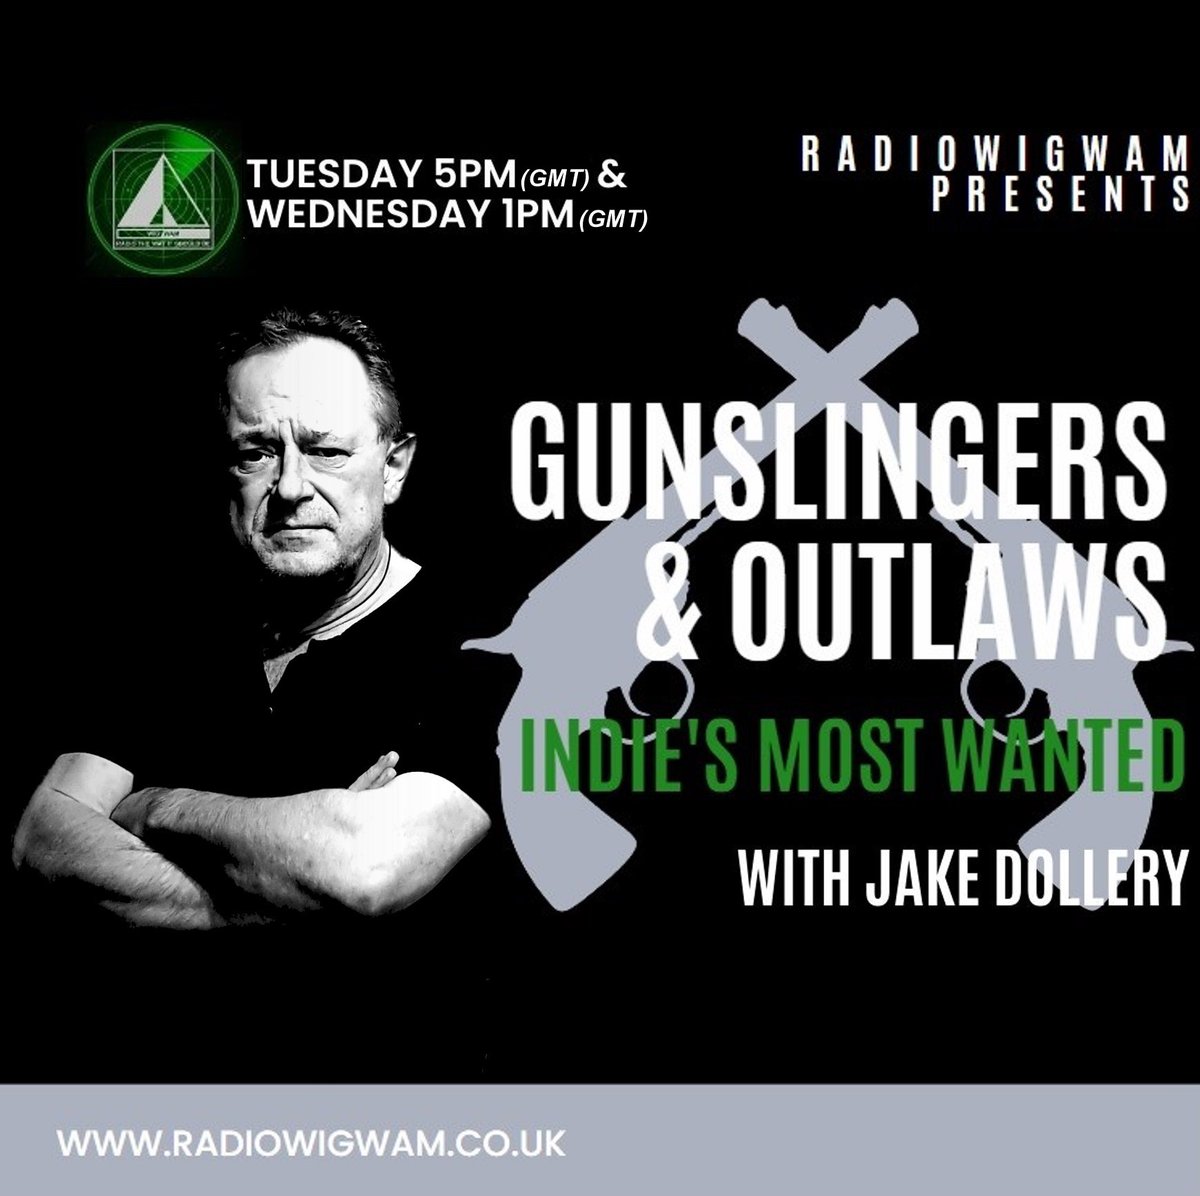 Join me for Gunslingers & Outlaws on @Radio_Wigwam at radiowigwam.co.uk Tuesday 5pm & again on Wednesday at 1pm (GMT). Included this week @evrythinisnothn @EleanorRising @SickAsTheives @daclockworks @buzzhummer @Kingstormbandofficial @VonDeeper @TwoHourWindow @LucaAnda